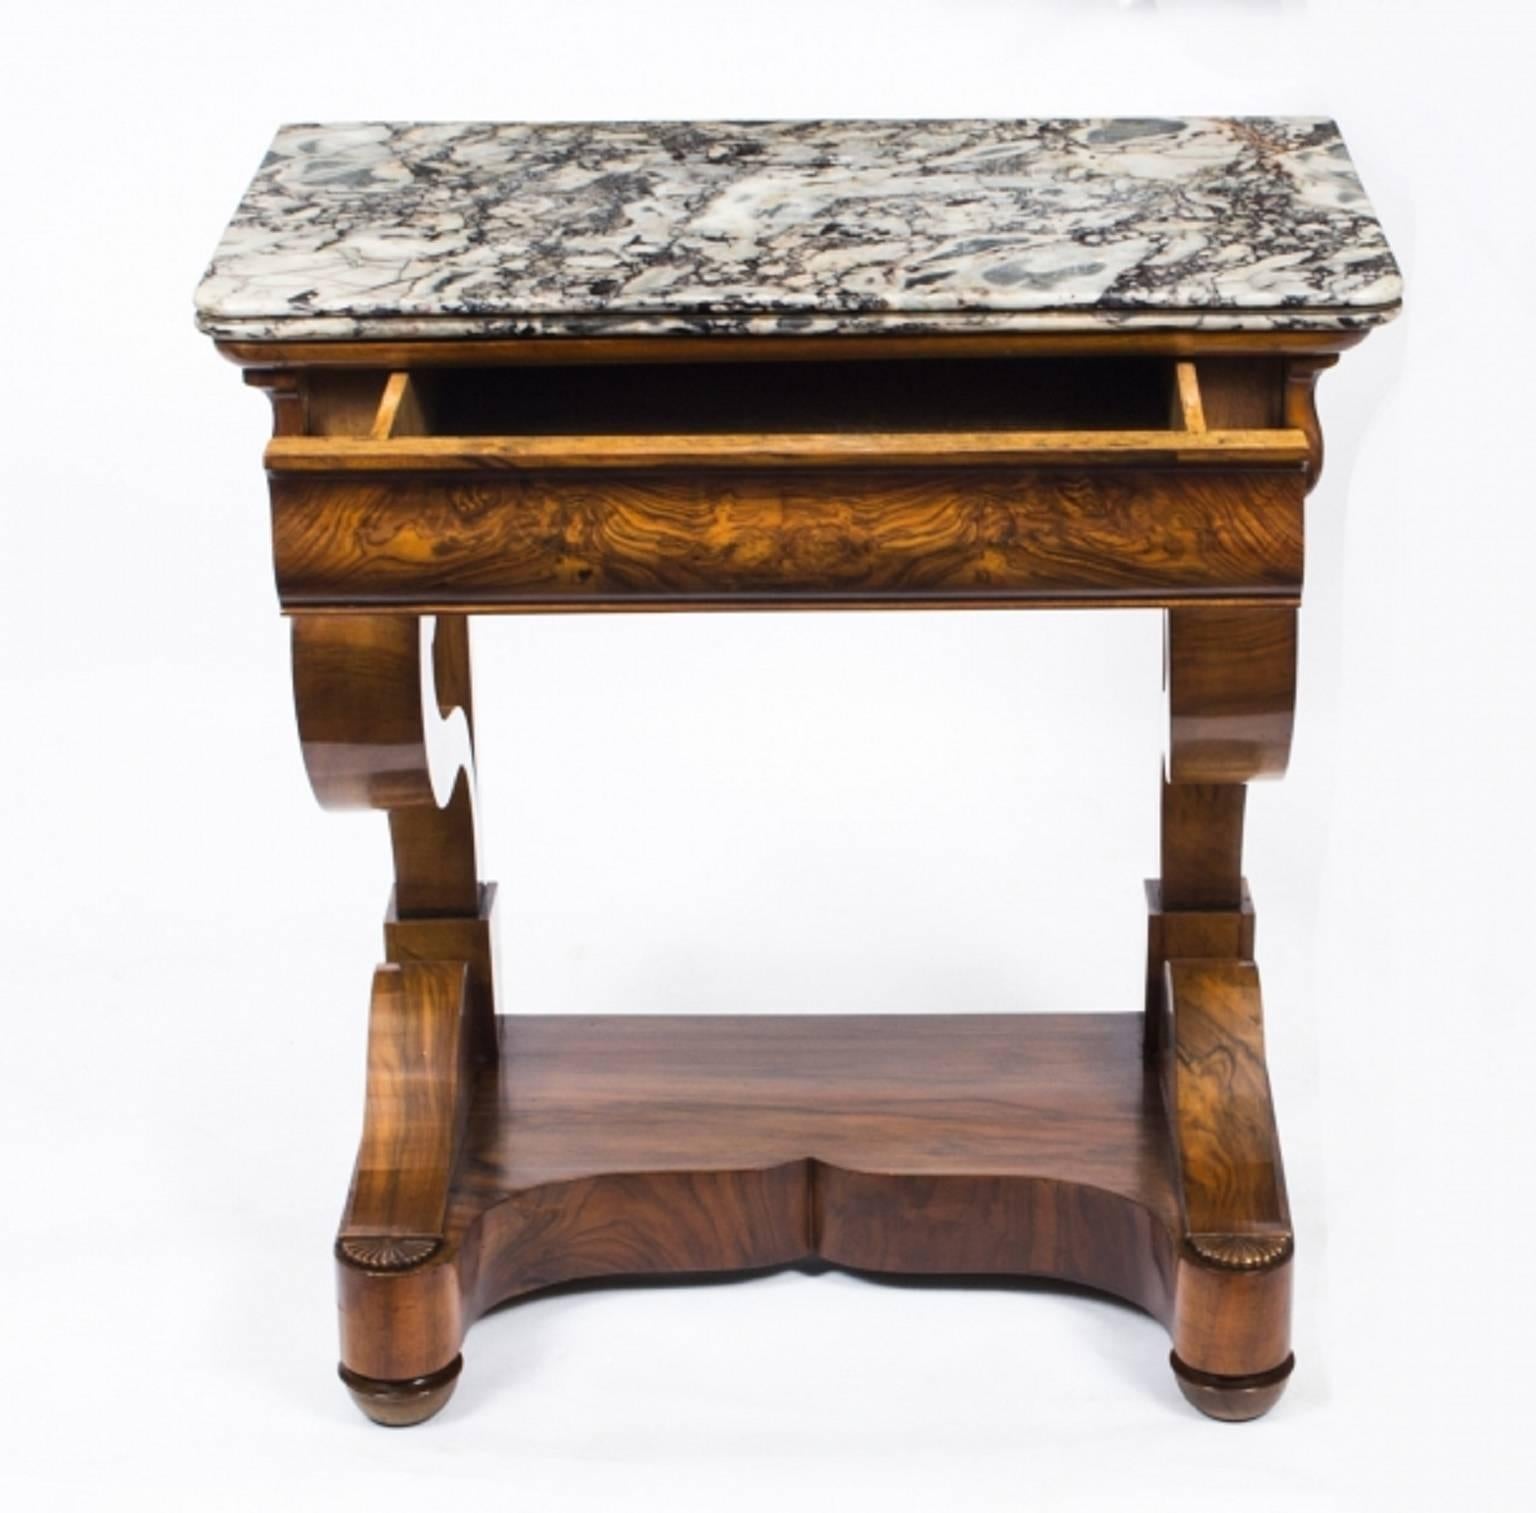 This is a very elegant and petite antique French Charles X period finely figured walnut console table, circa 1830 in date.

This wonderful console table retains its original Gris St Anne marble top has a useful frieze drawer and stands on curvaceous